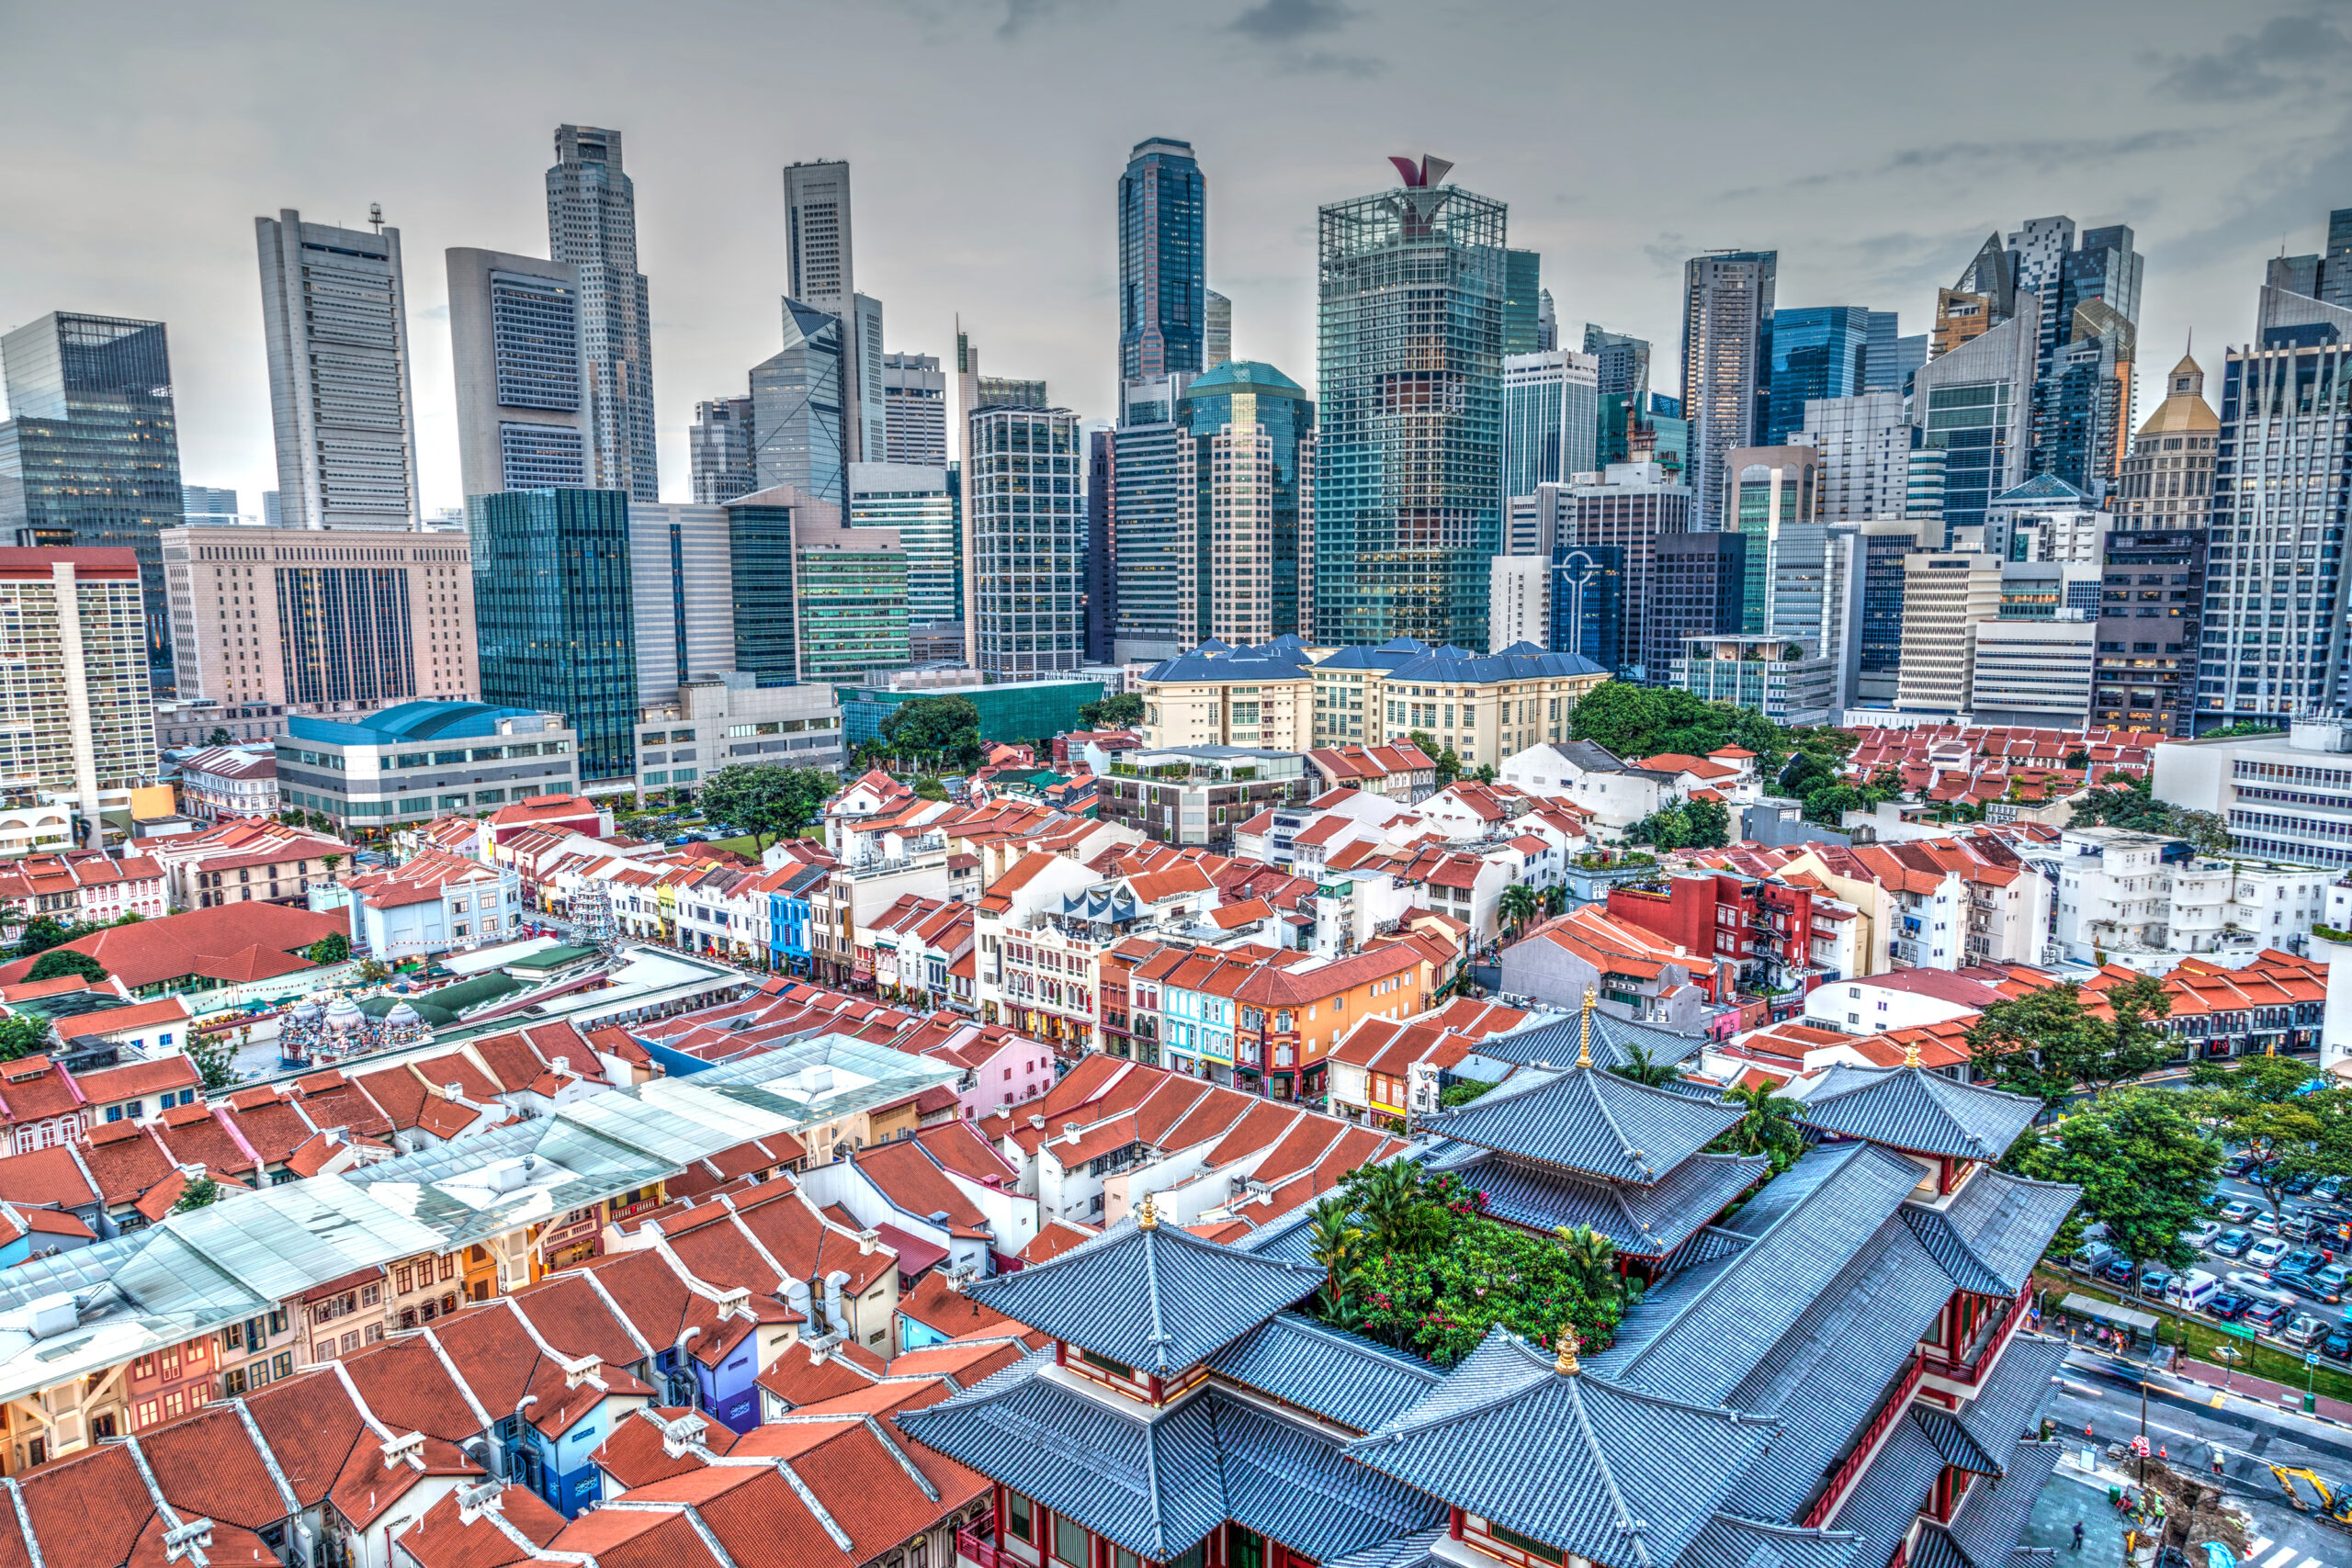 An,Aerial,View,Of,Singapore's,Chinatown,With,Its,Distinct,Low-rise,